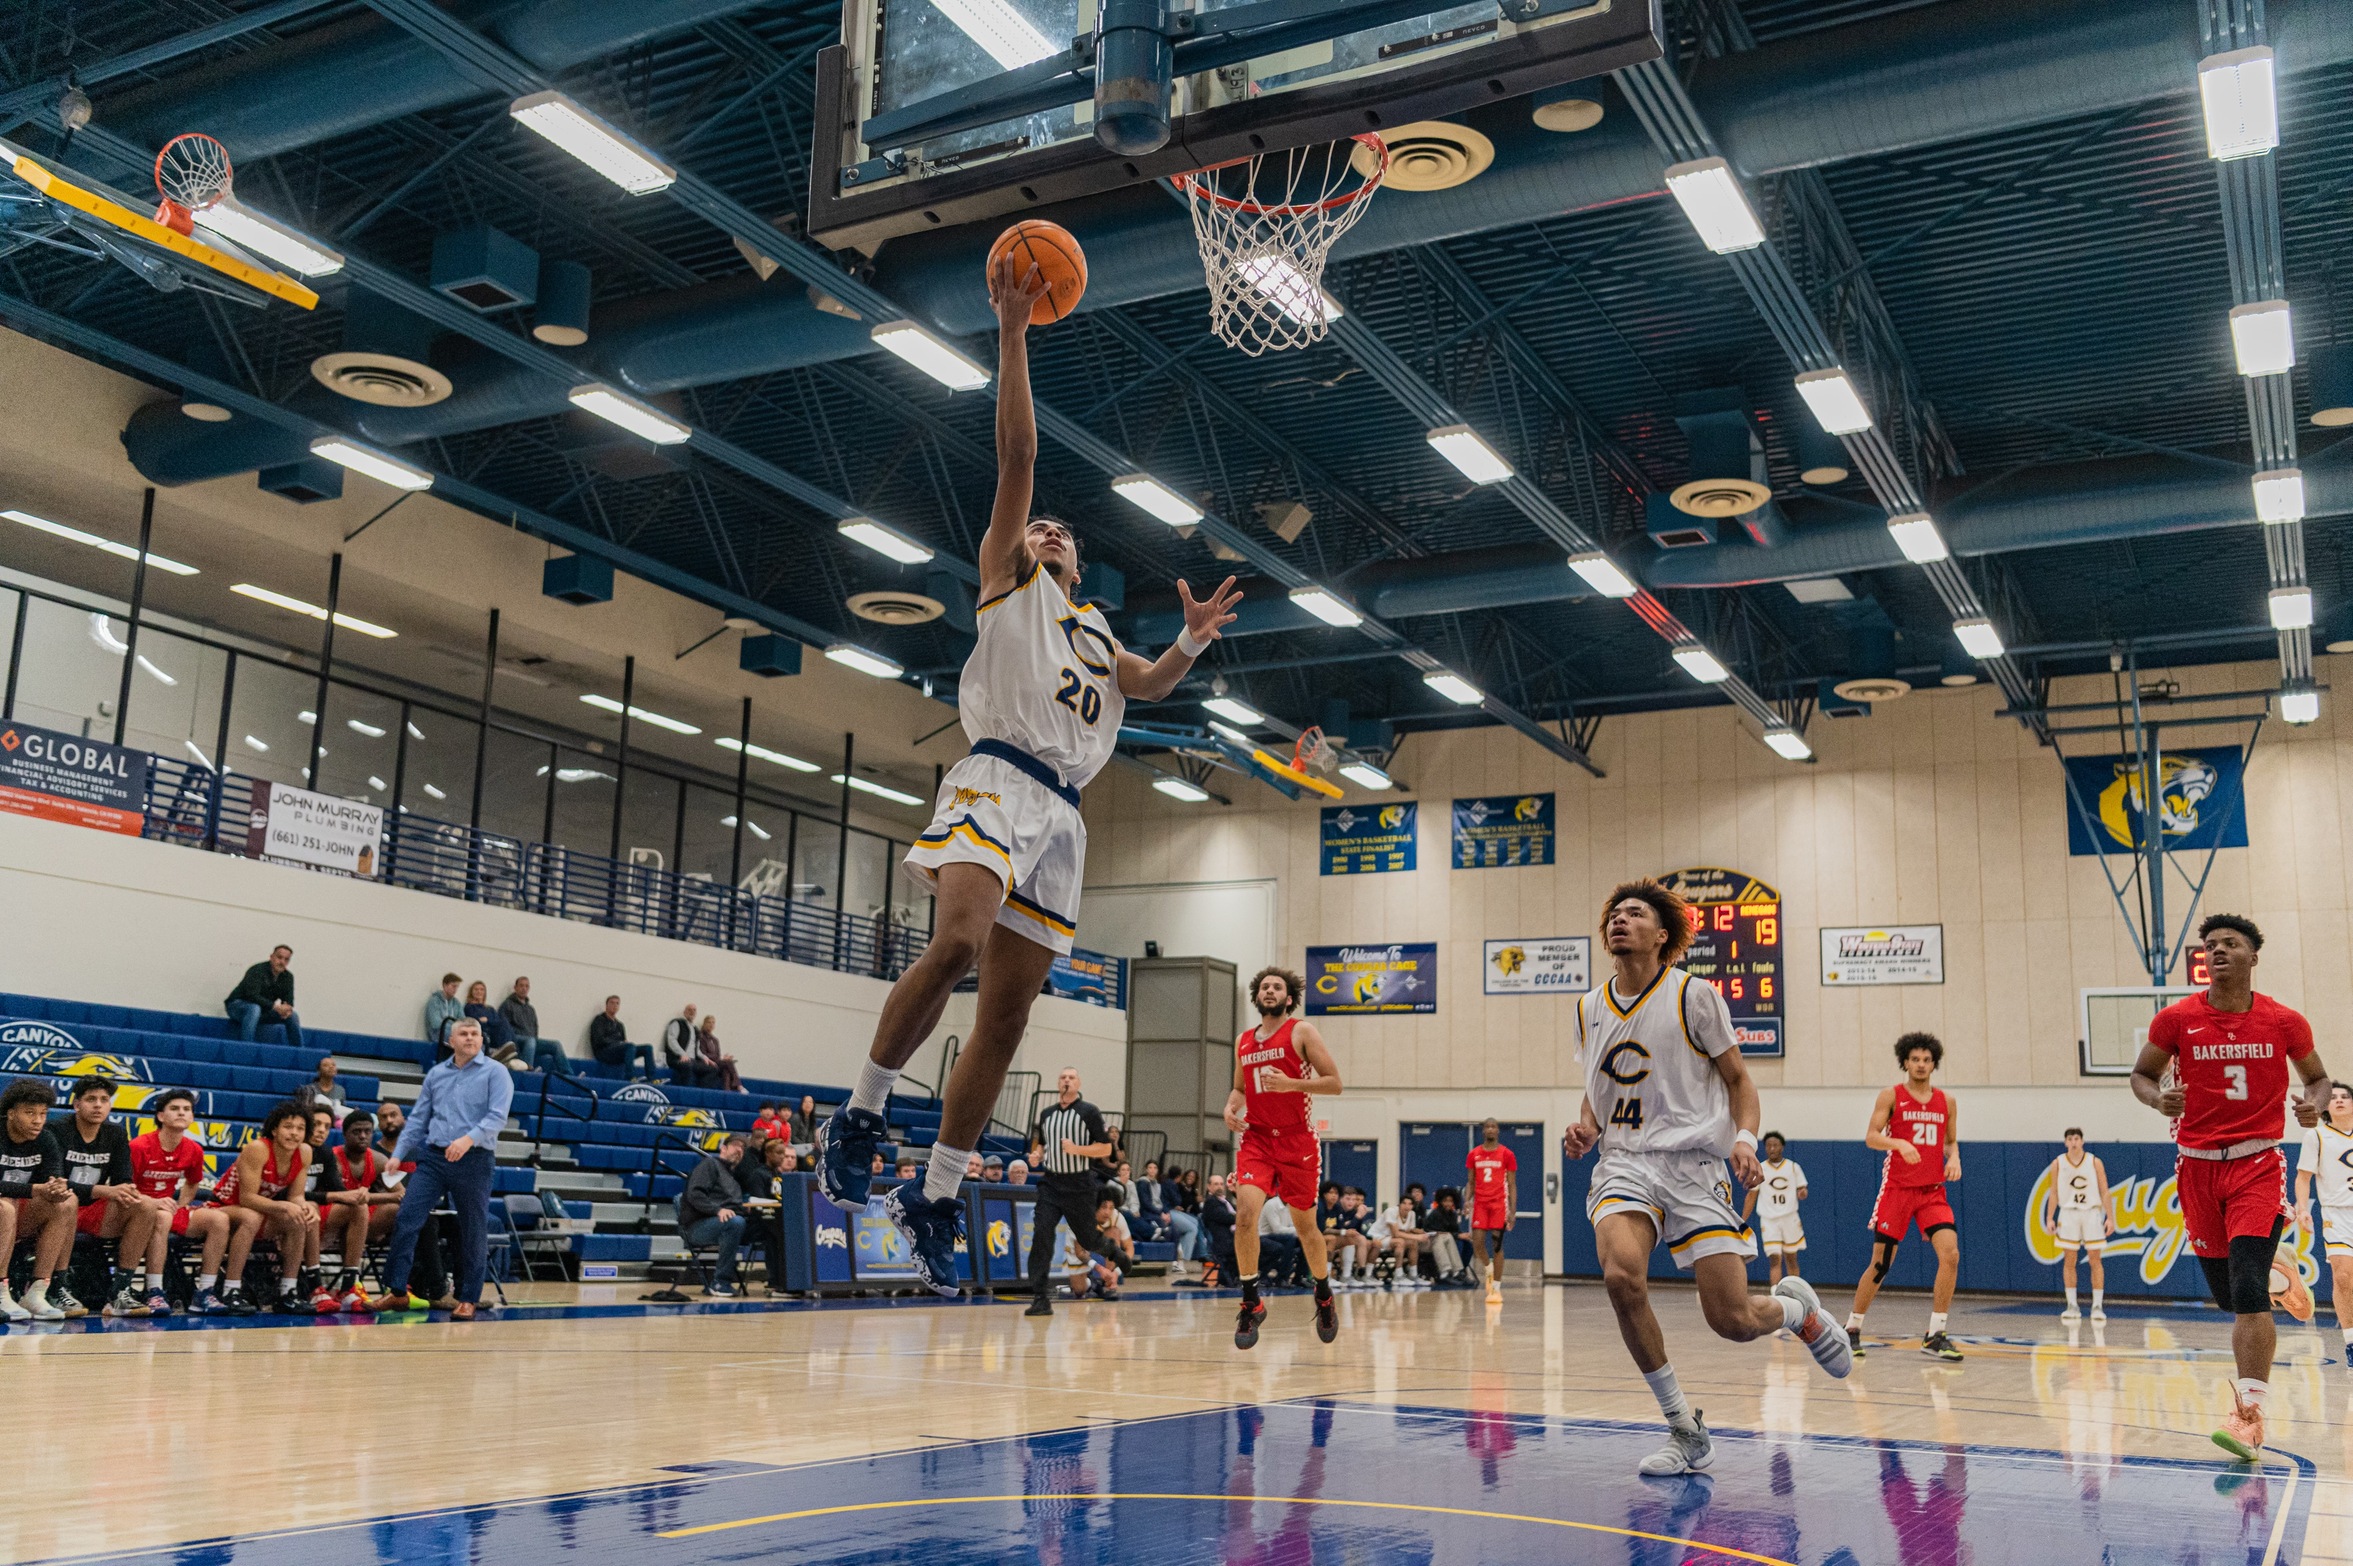 College of the Canyons men's basketball vs. Bakersfield College on Feb. 1, 2023.